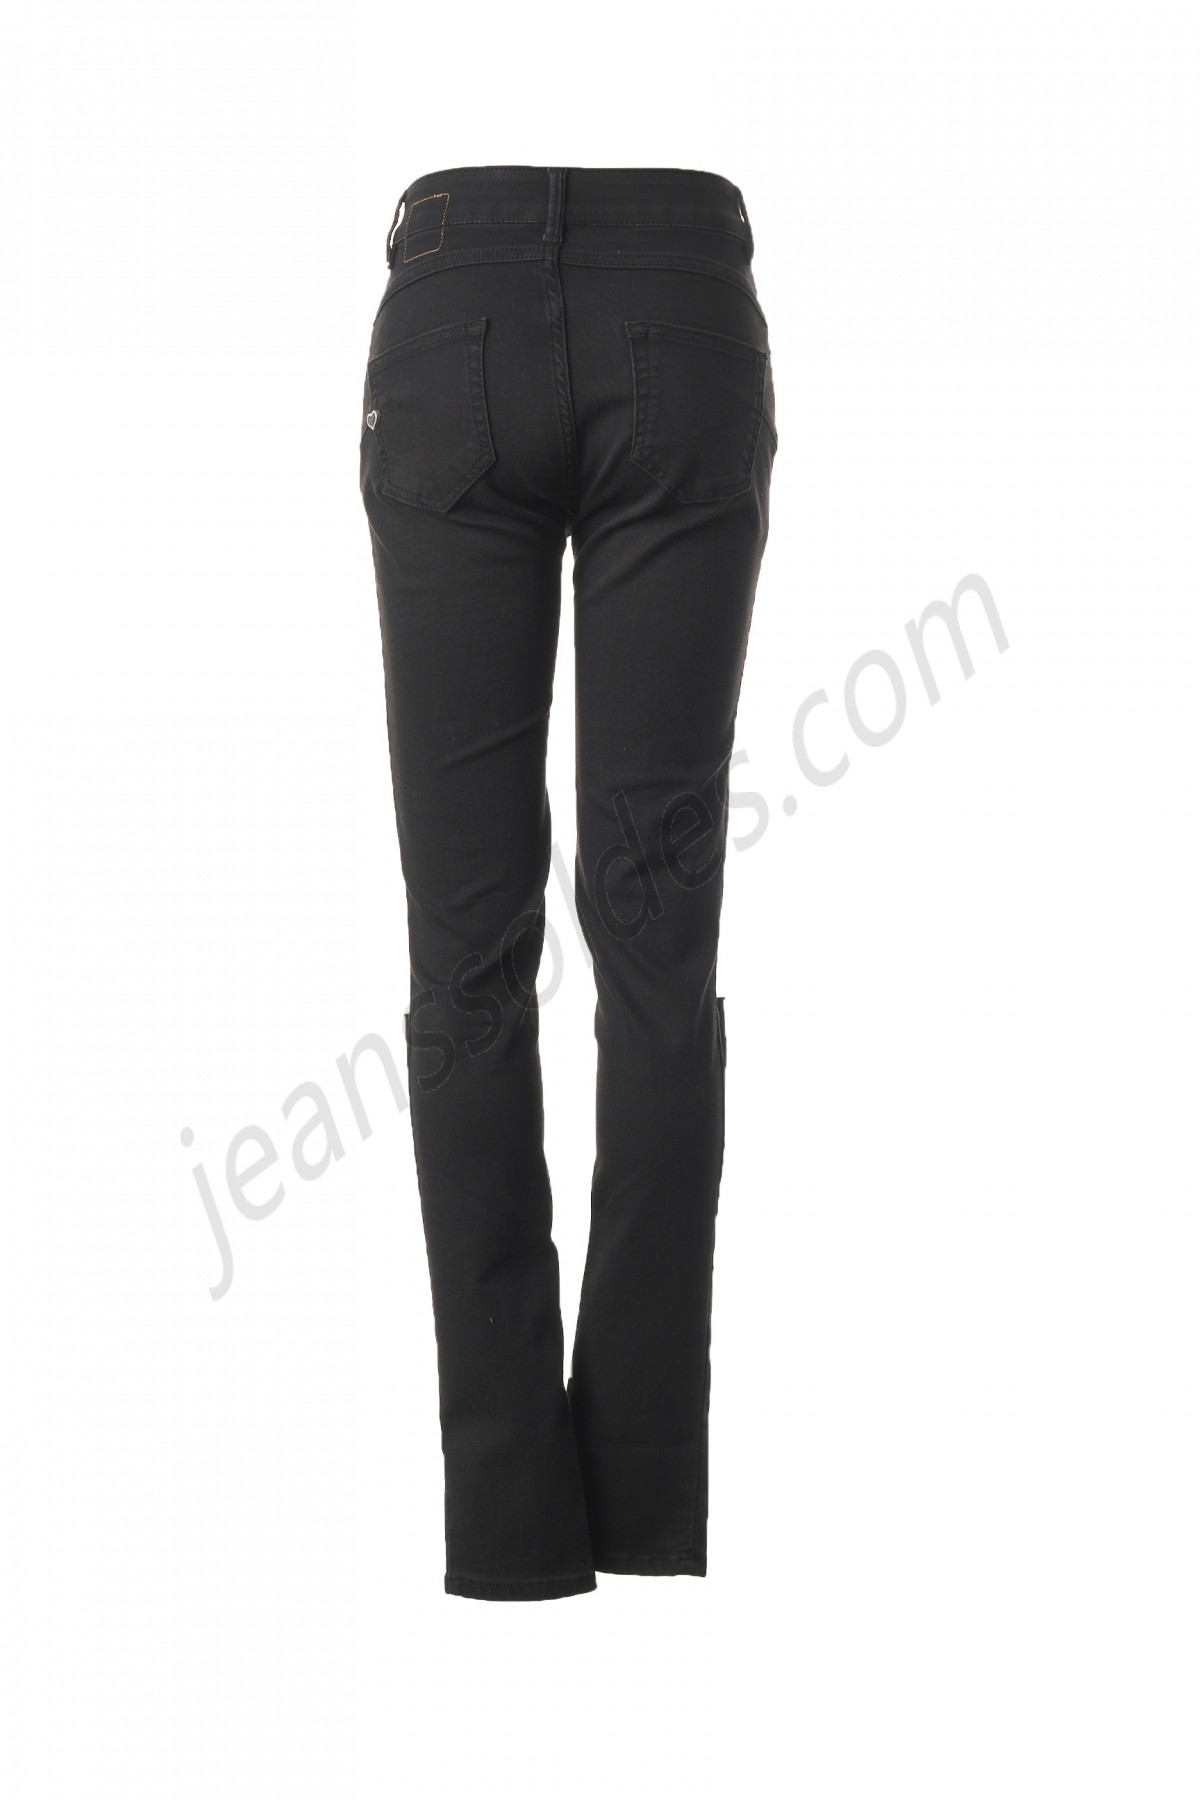 my twin-Jeans coupe slim prix d’amis - -1